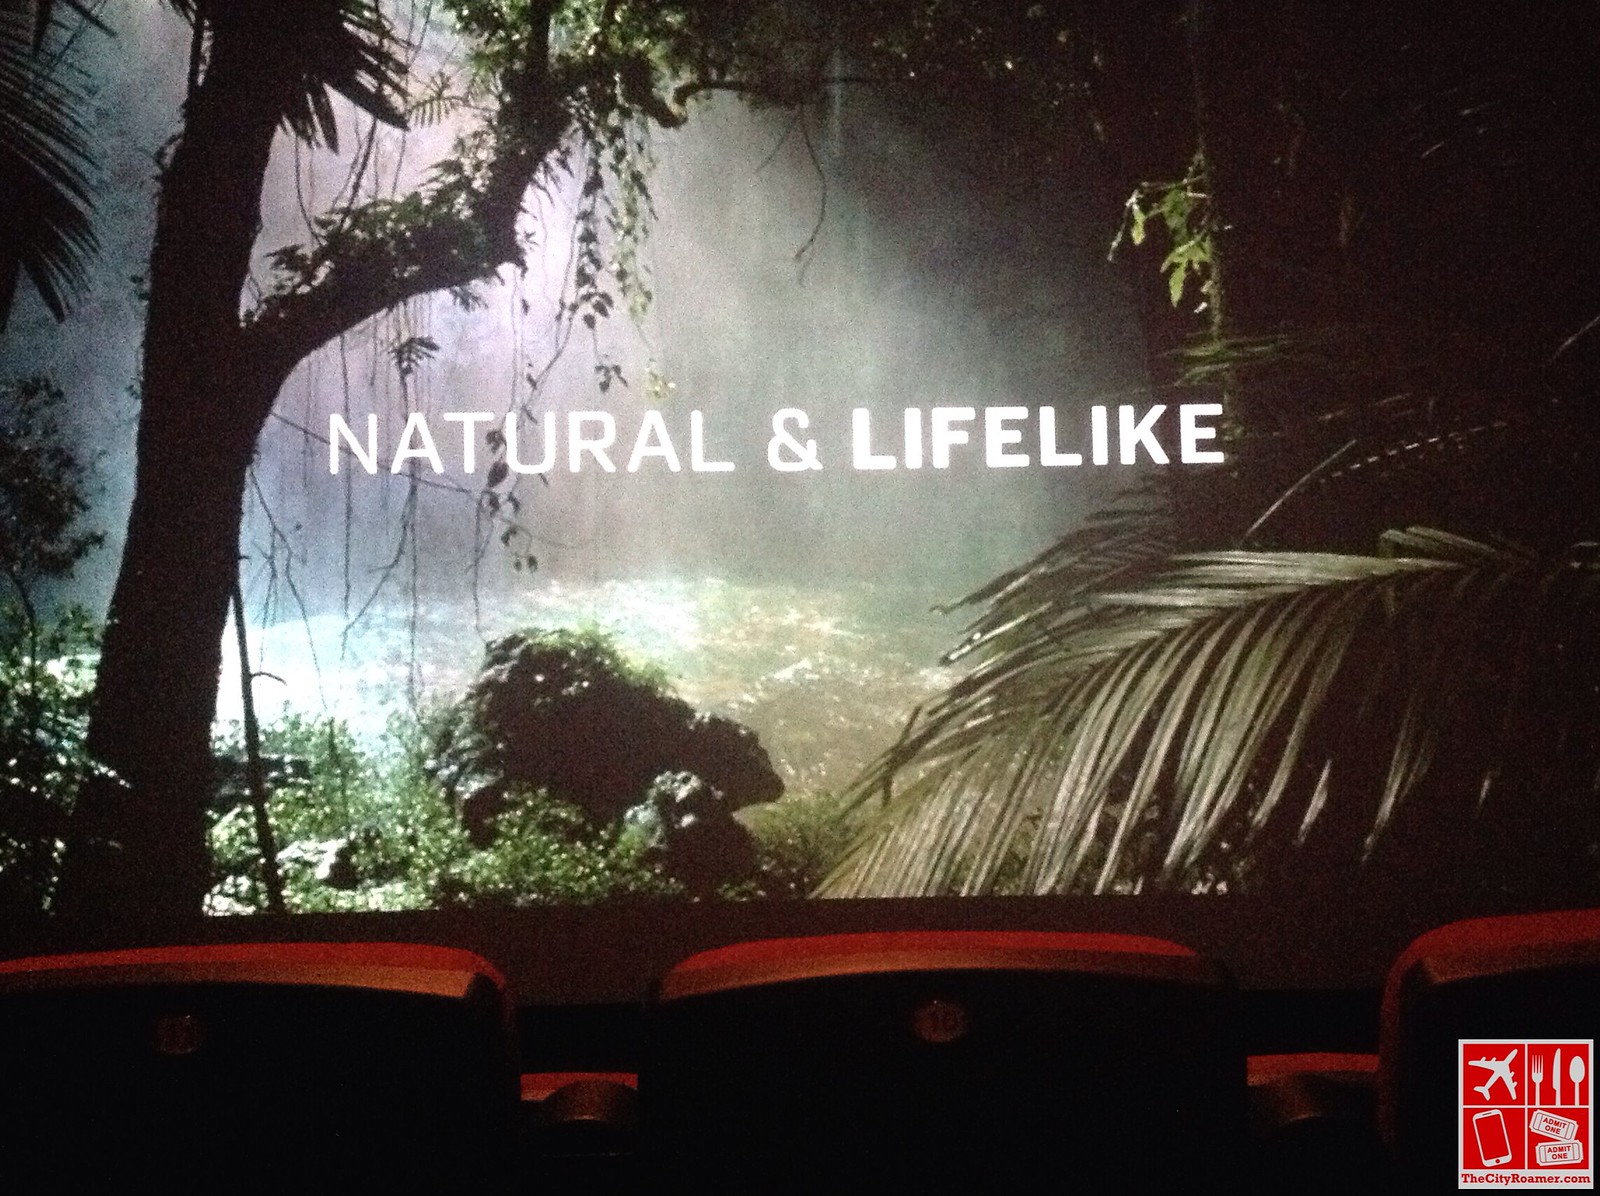 Natural and Lifelike sounds with Dolby Atmos